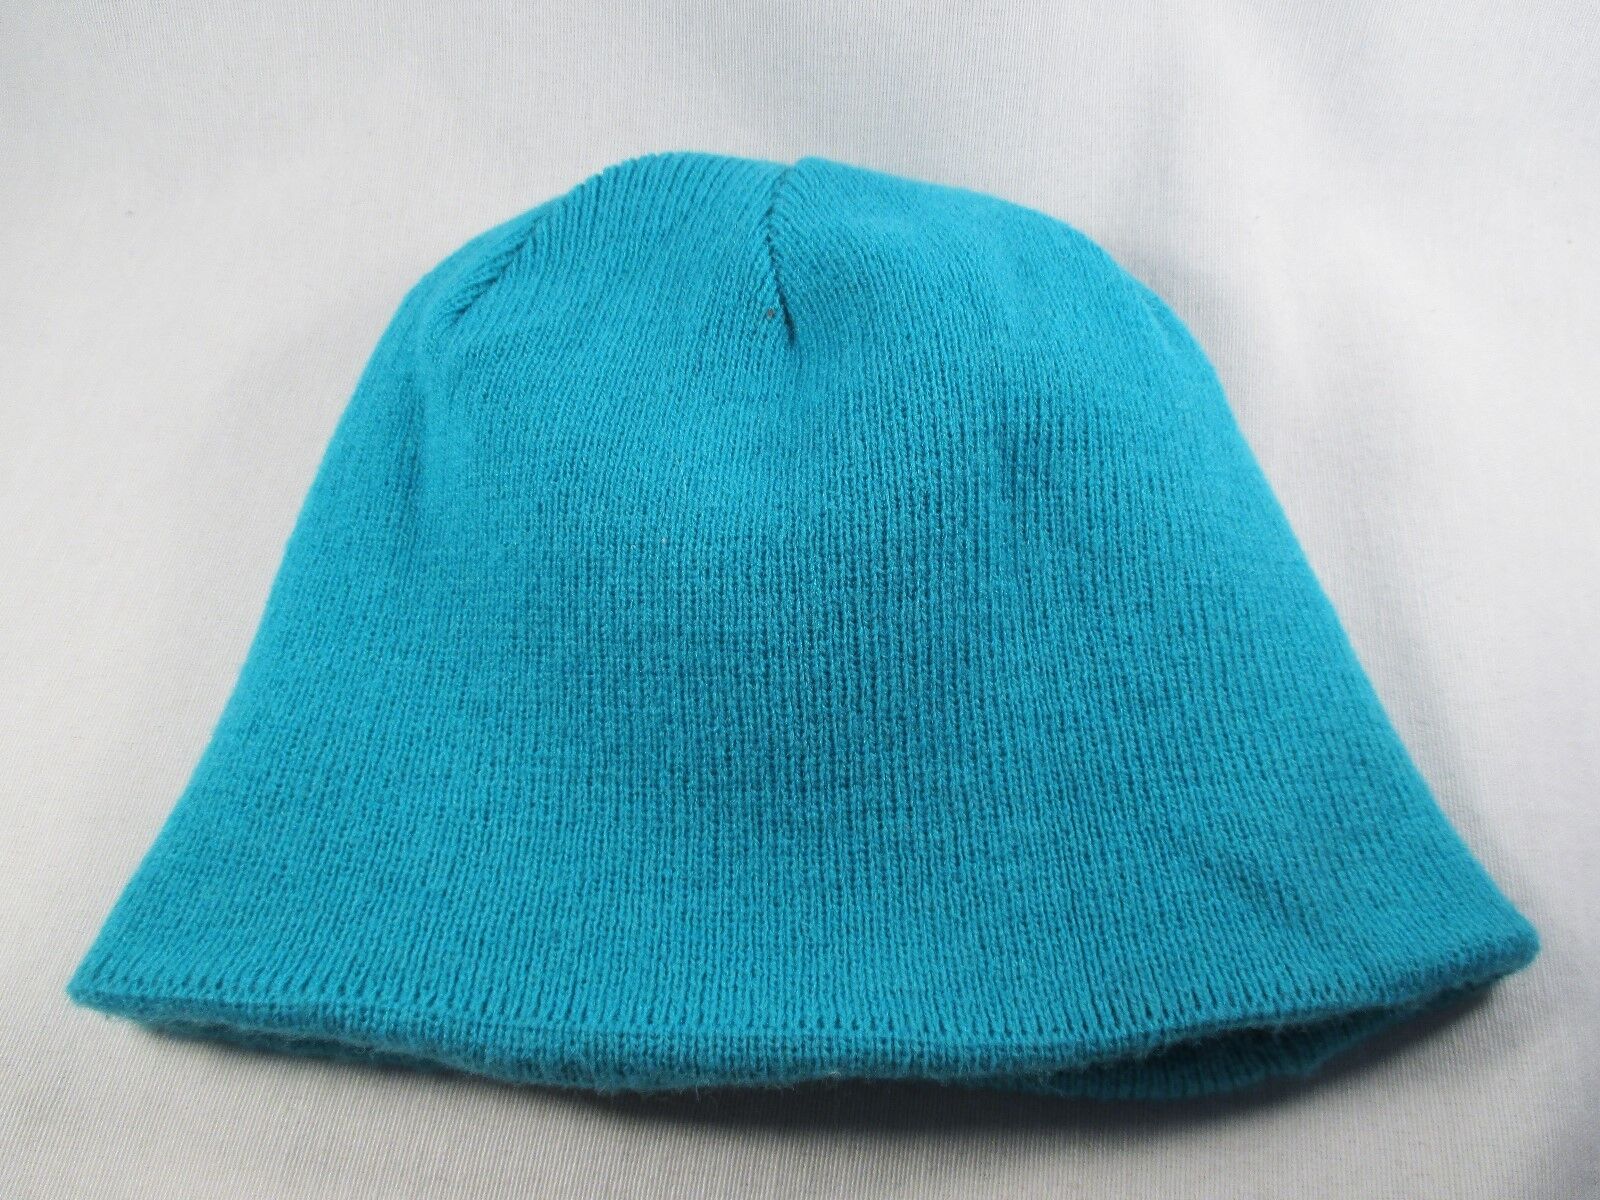 Gerry Youth One Size Blue Beanie Cap Hat Great Condition | eBay